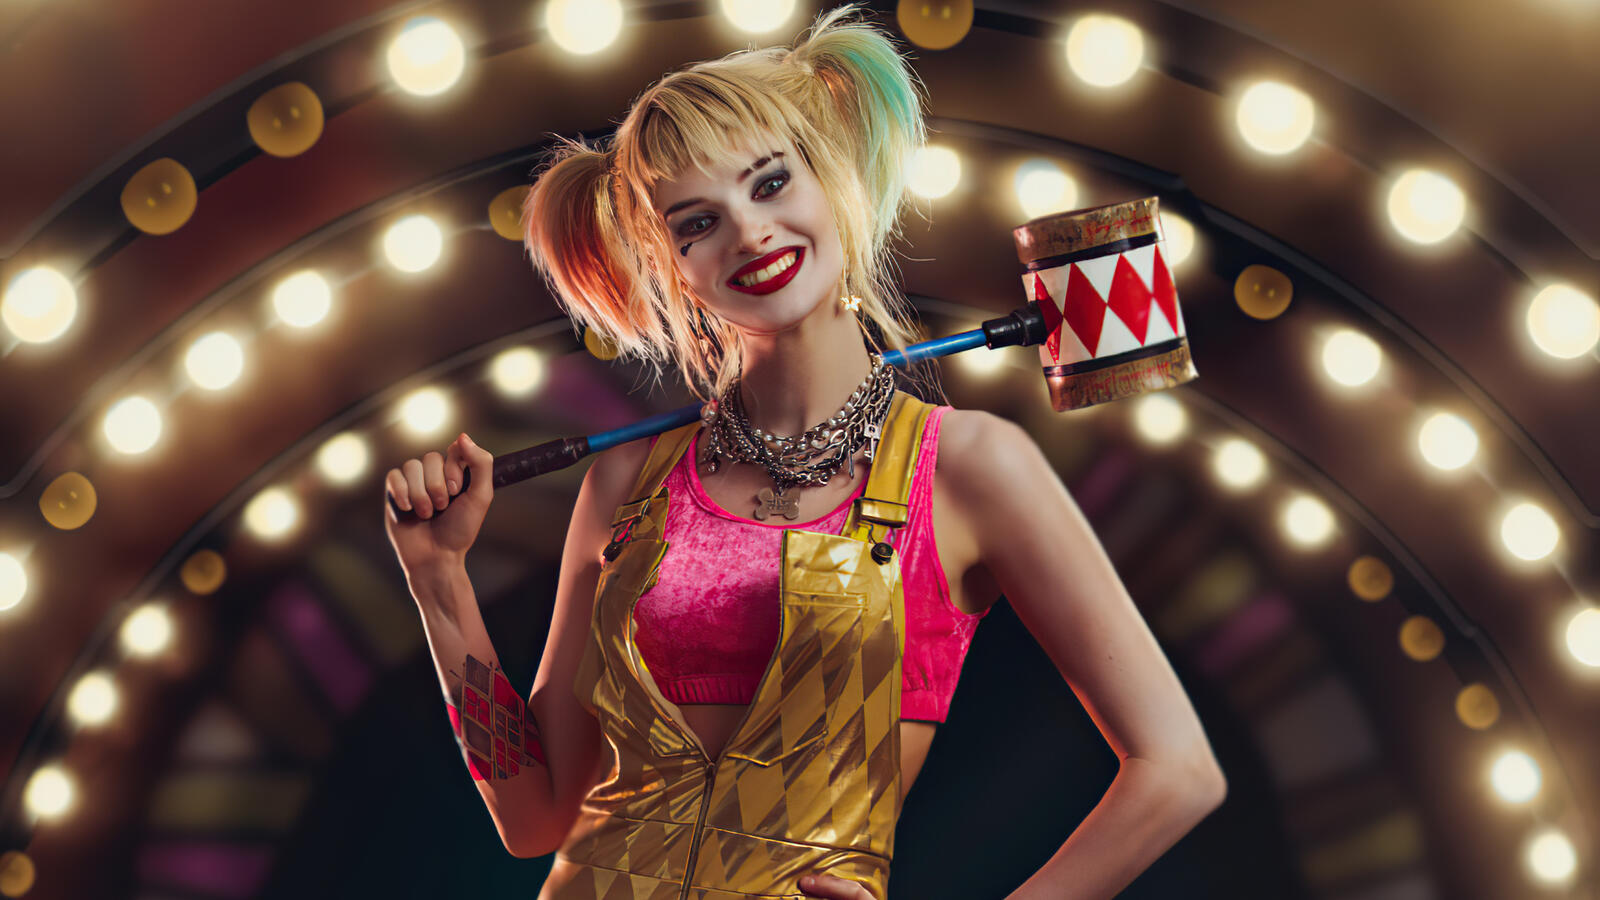 Free photo Smiling Harley Quinn with a sledgehammer